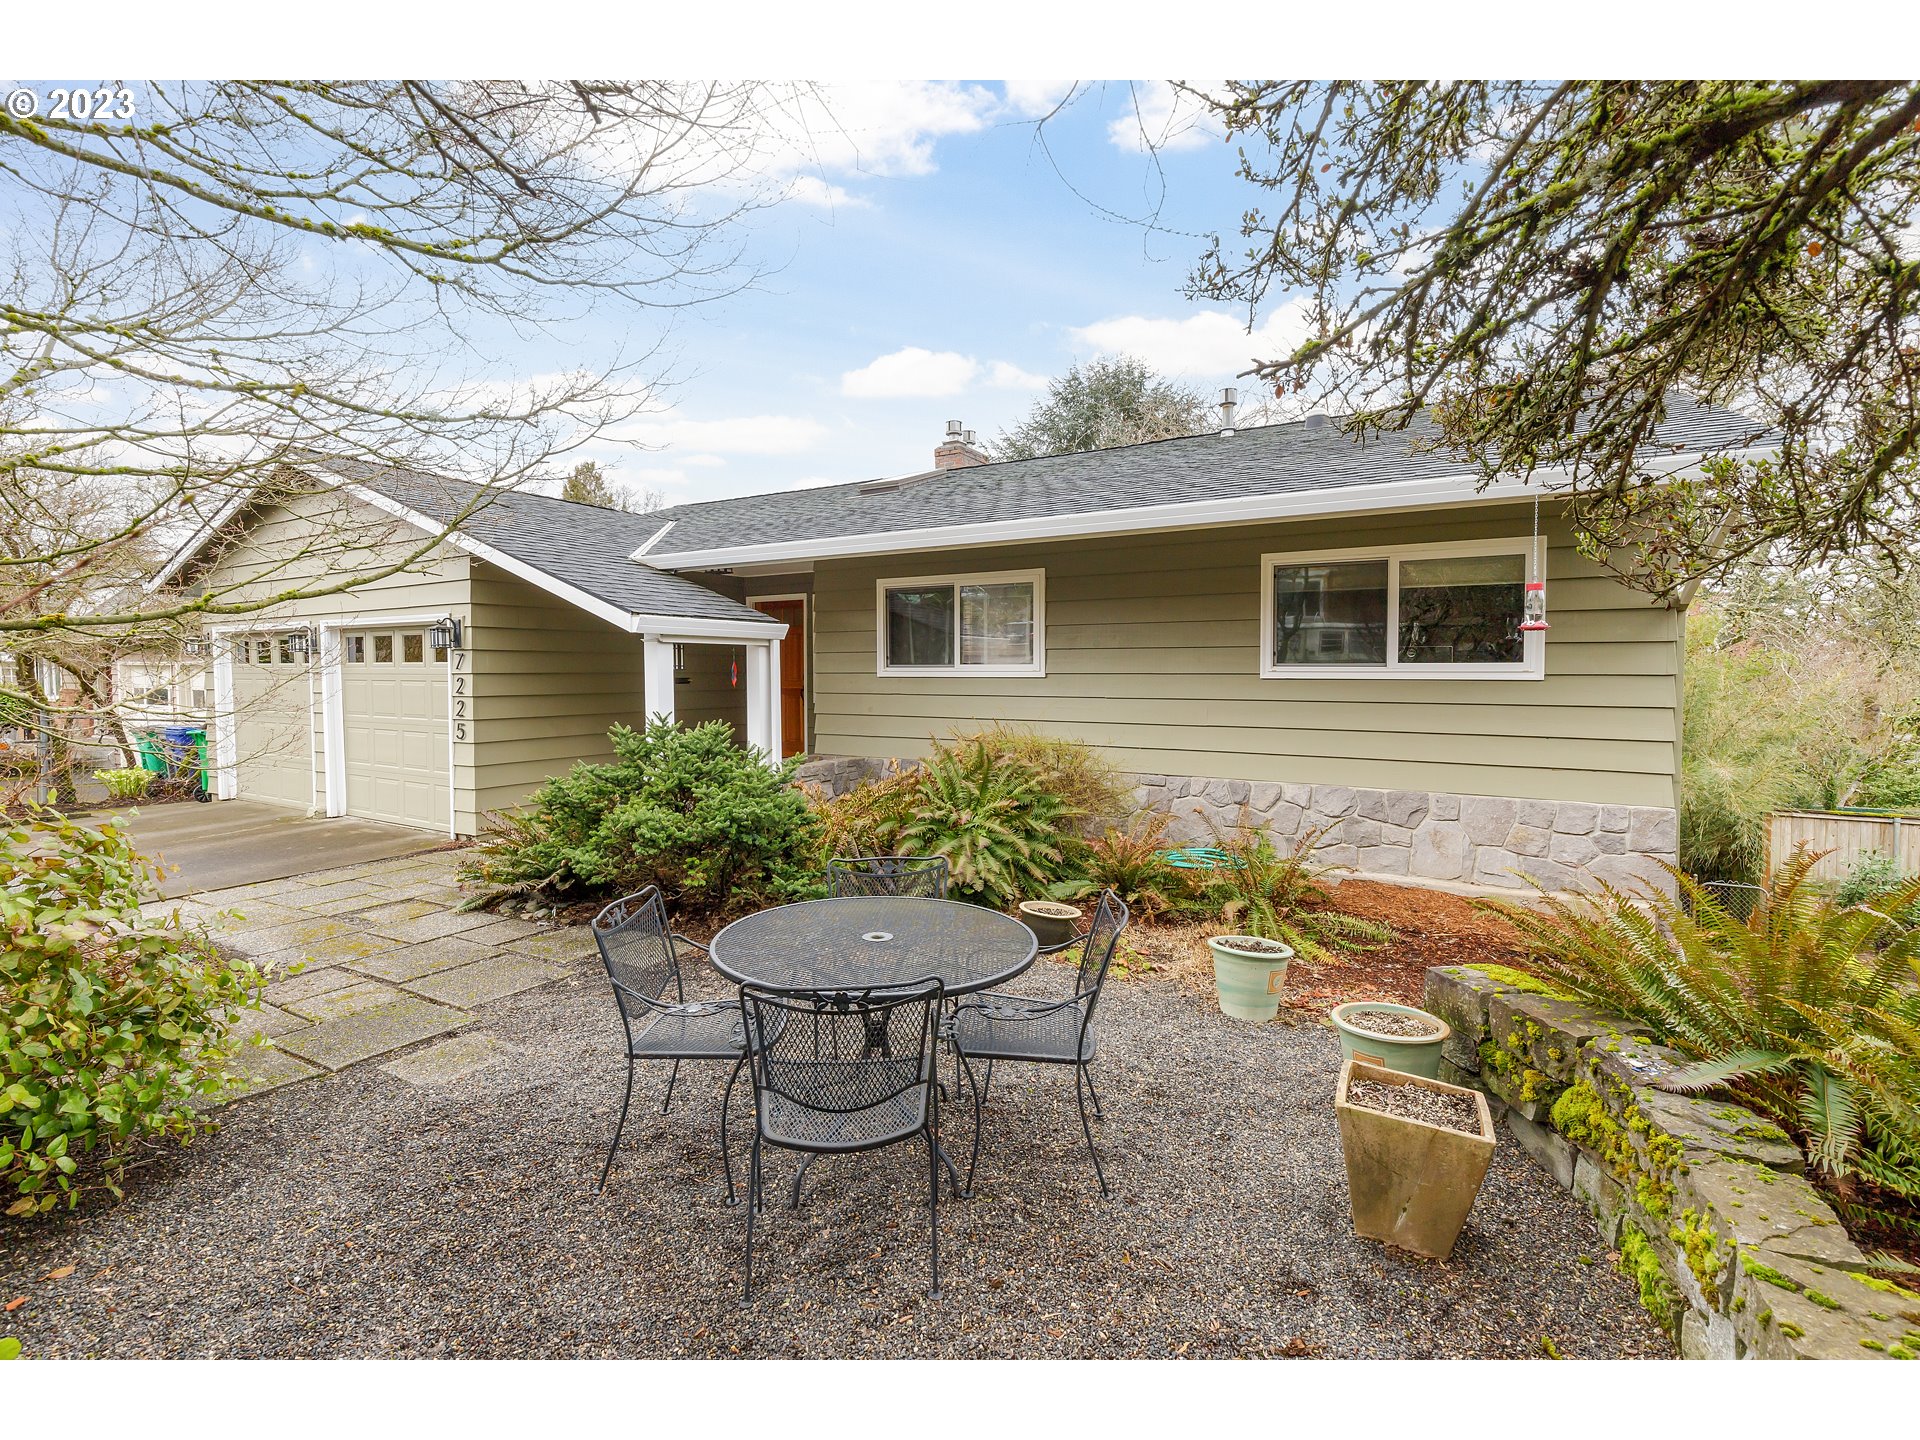 7225 SW 34TH AVE, Portland, OR 97219